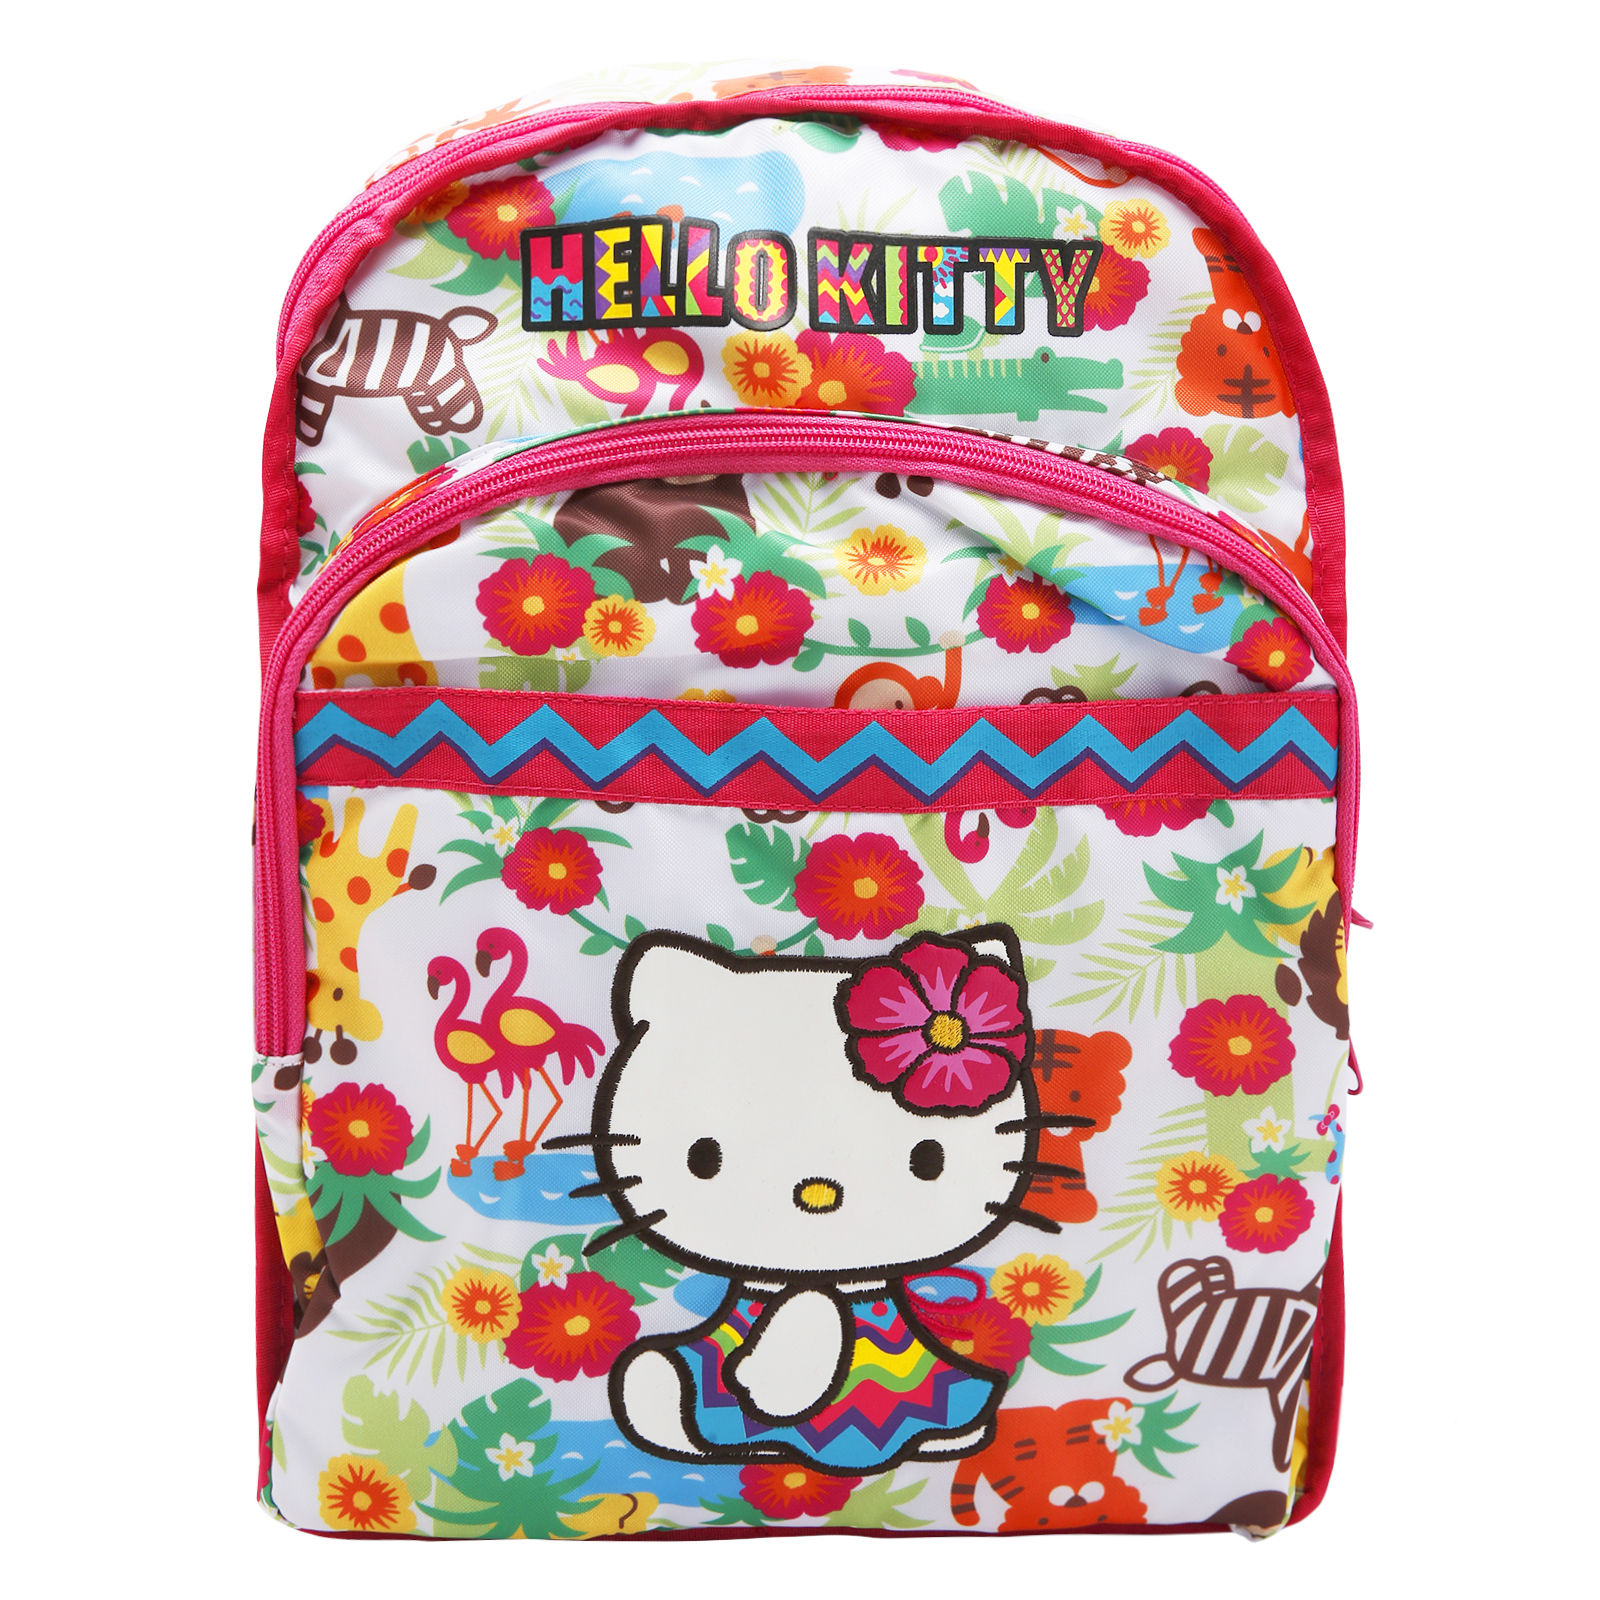 Hello Kitty Printed Backpack, School Bag, Printed Animals Texture, Multicolour